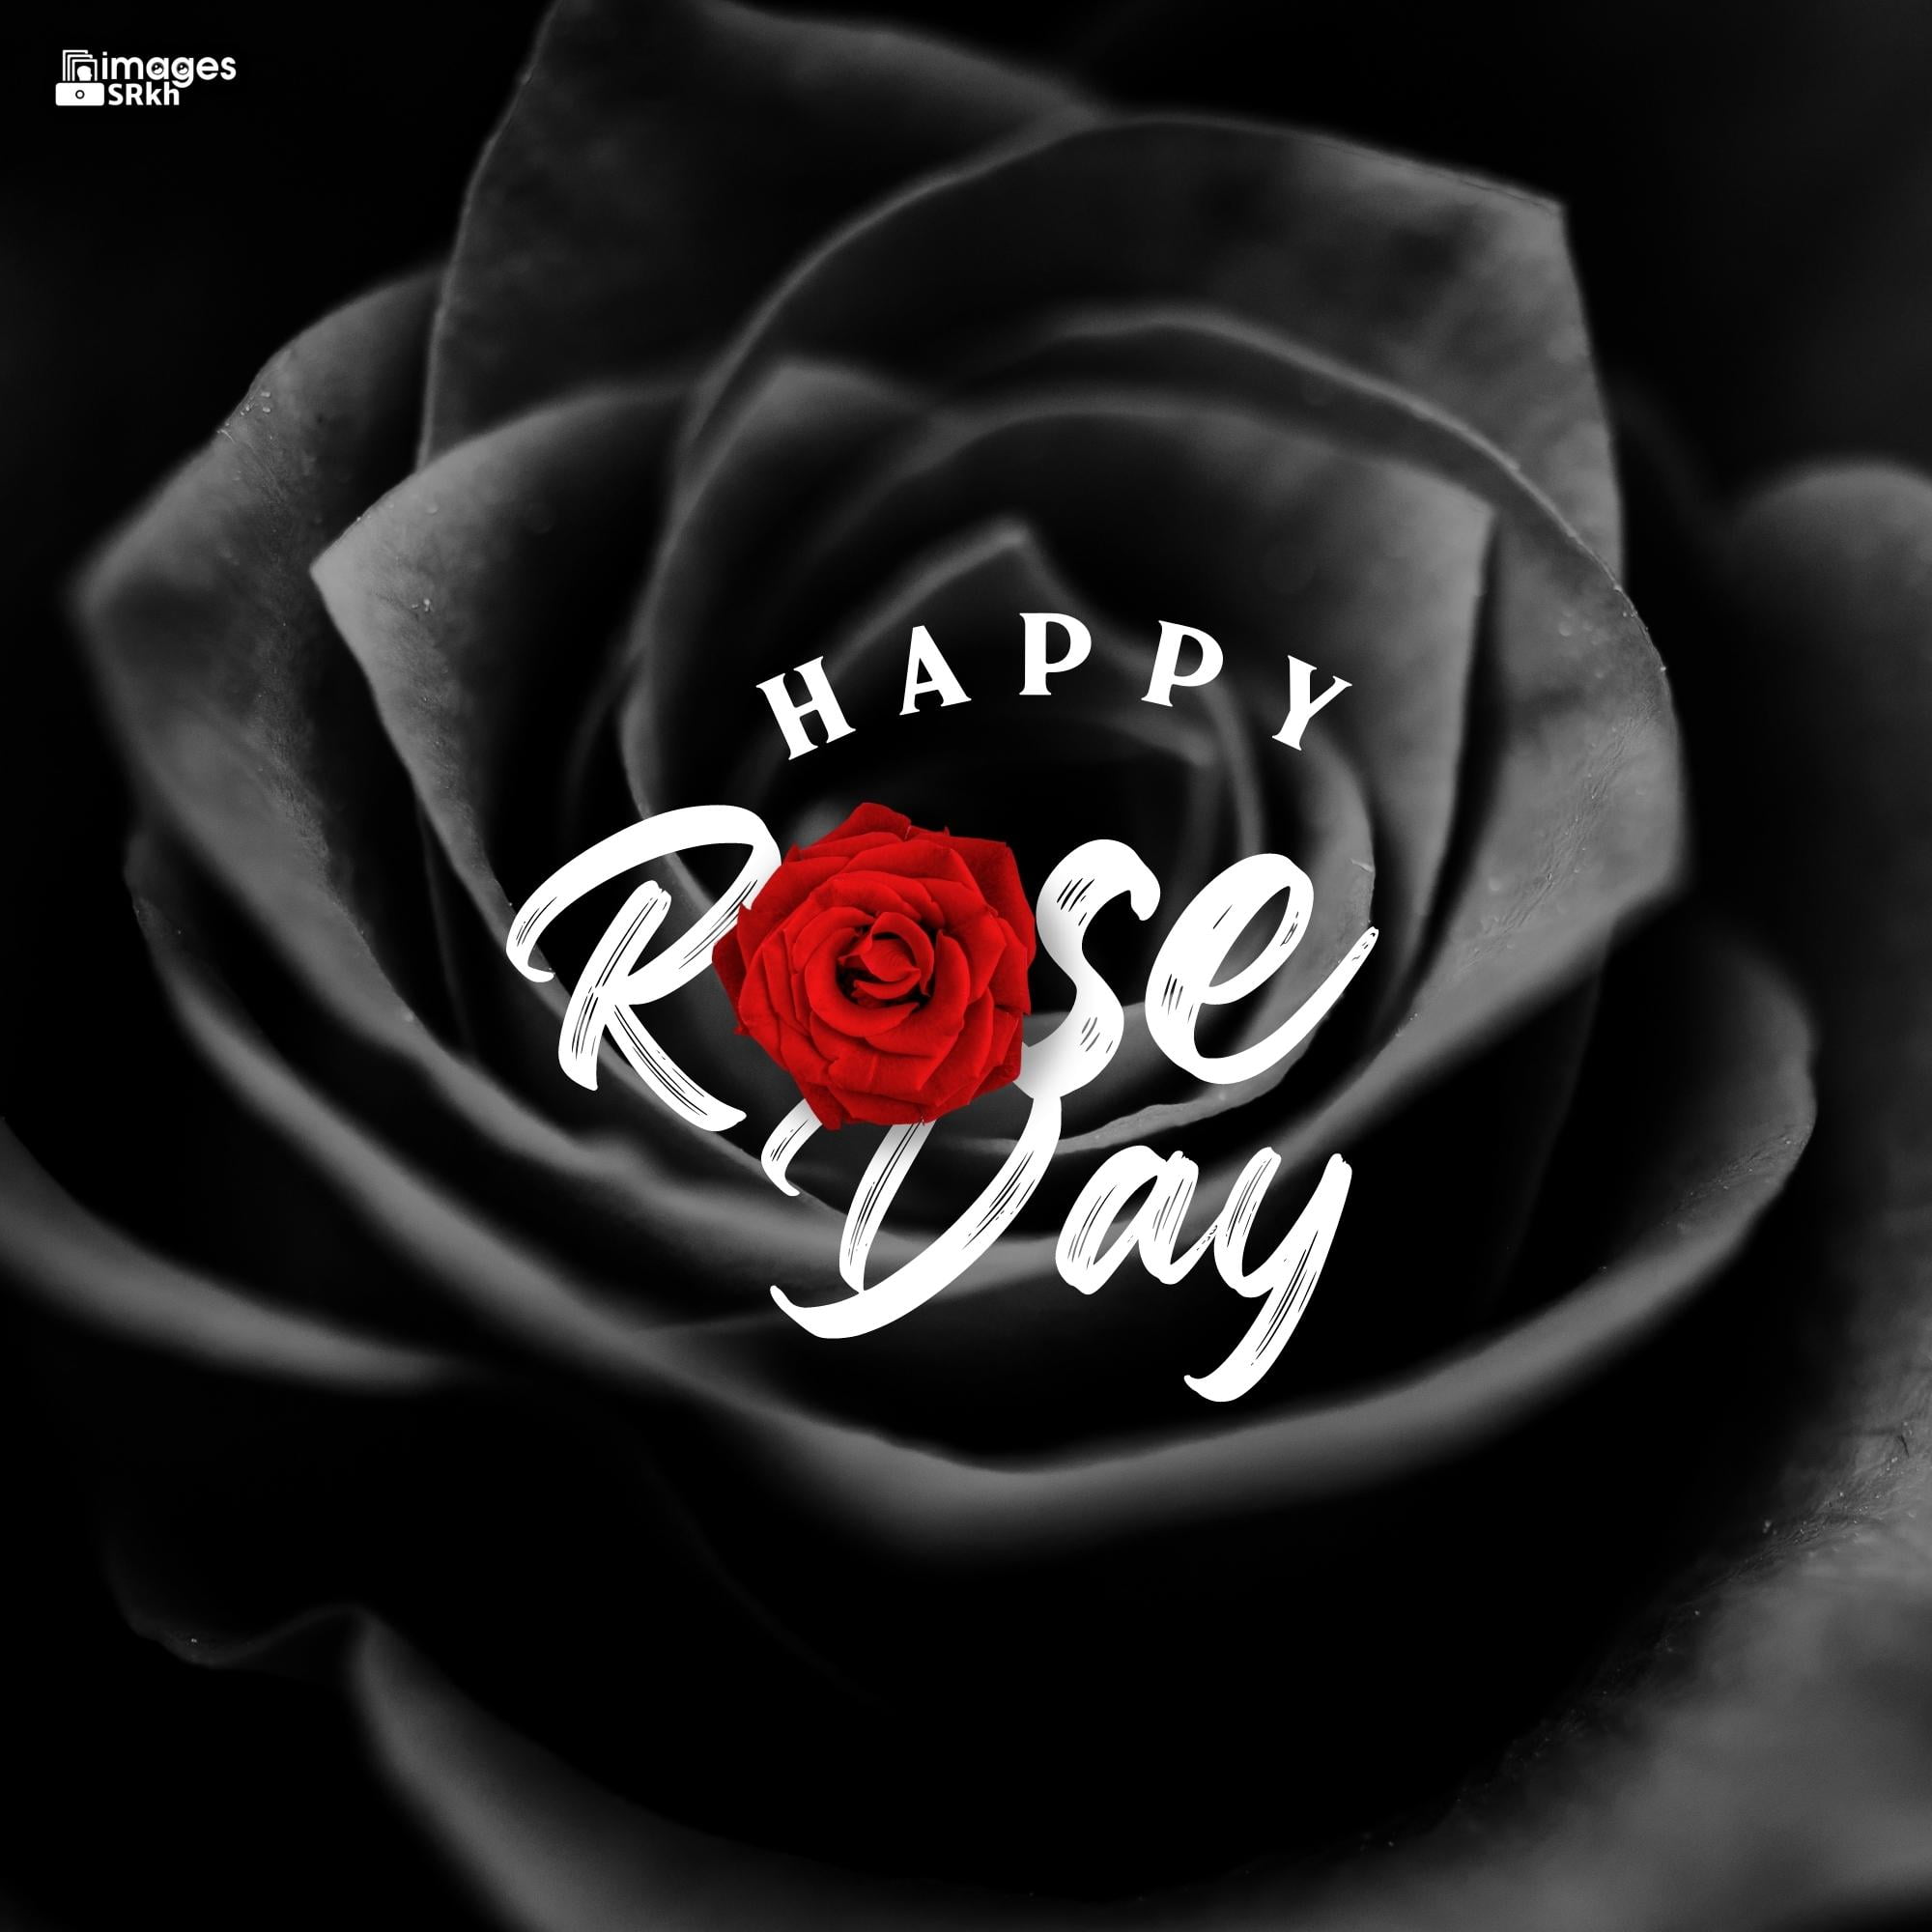 Happy Rose Day Image Hd Download (8)